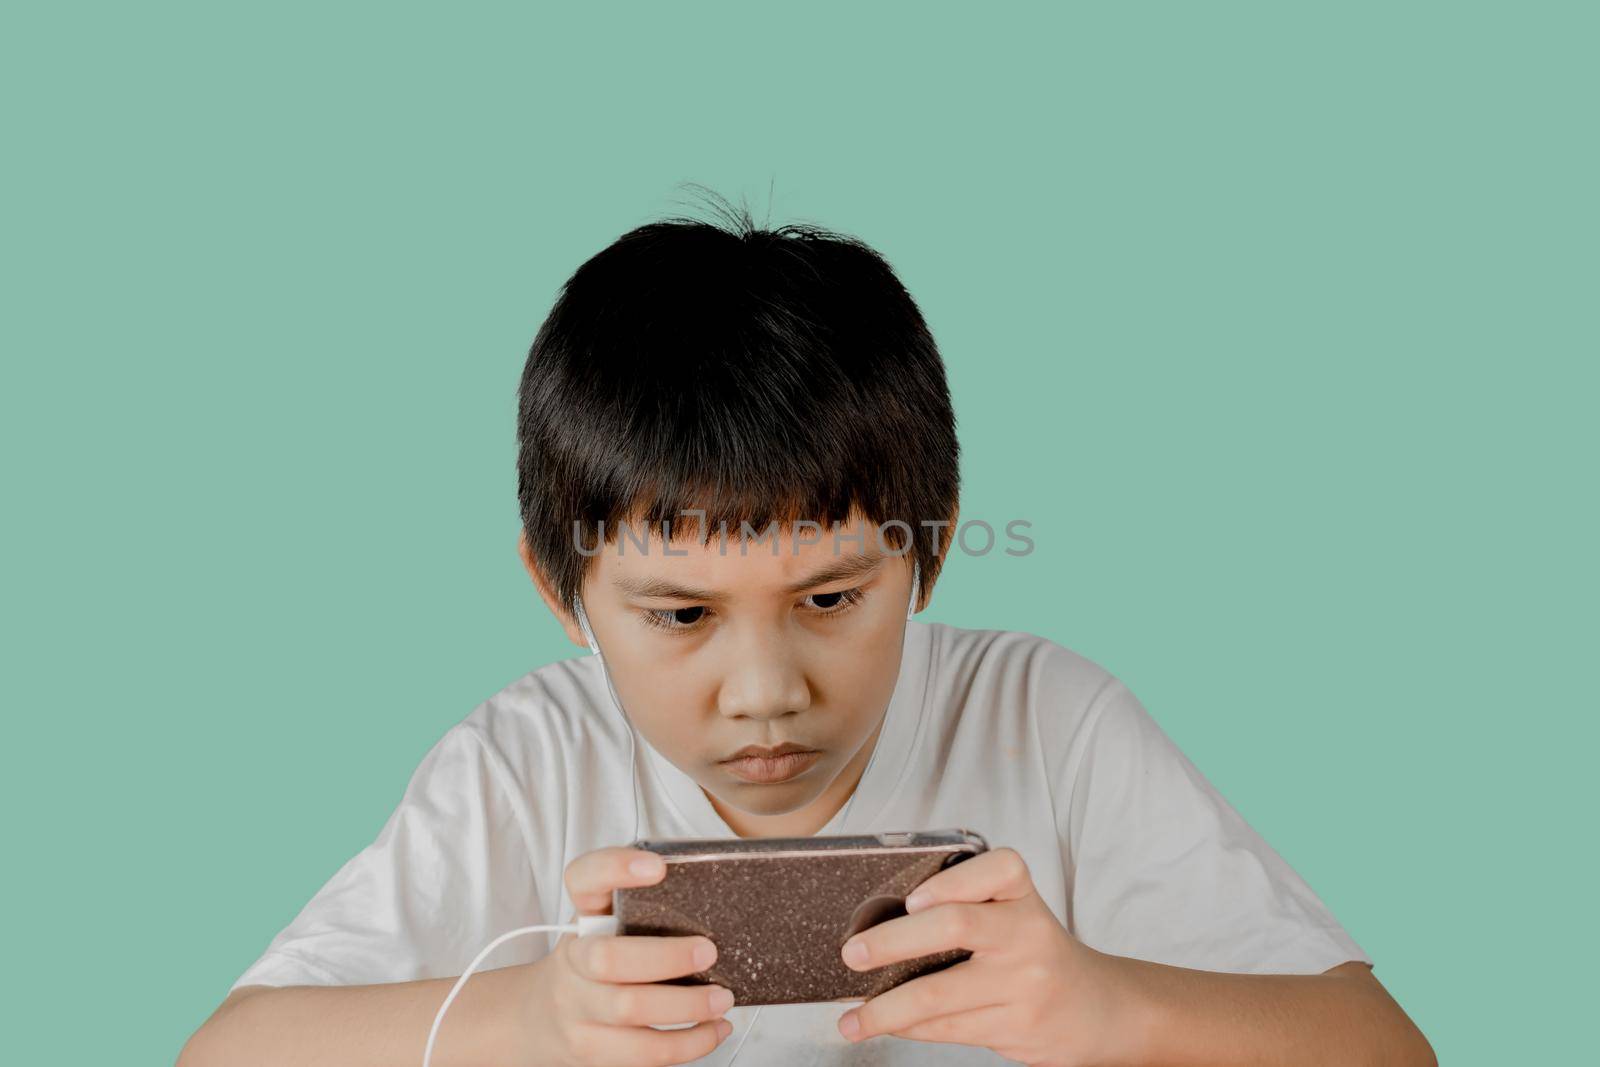 Closeup of a boy's face wearing earphones and intending to play games on his smartphone. by wattanaphob